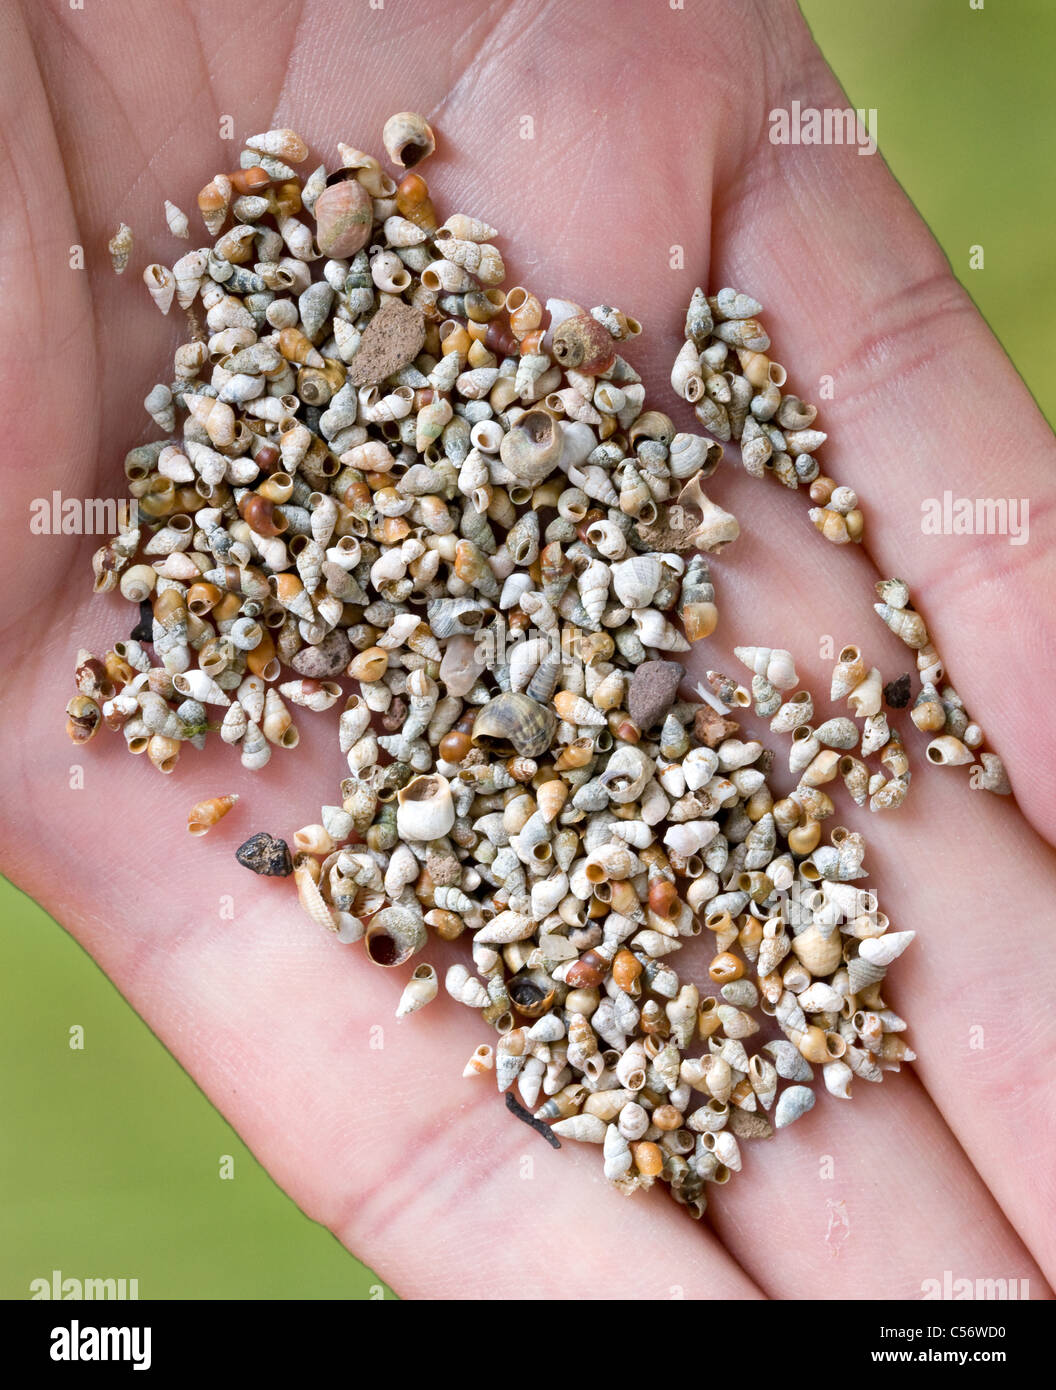 Wader food in the form of tiny sea snail and other mollusc shells - these form much of the diet of many wading birds Stock Photo